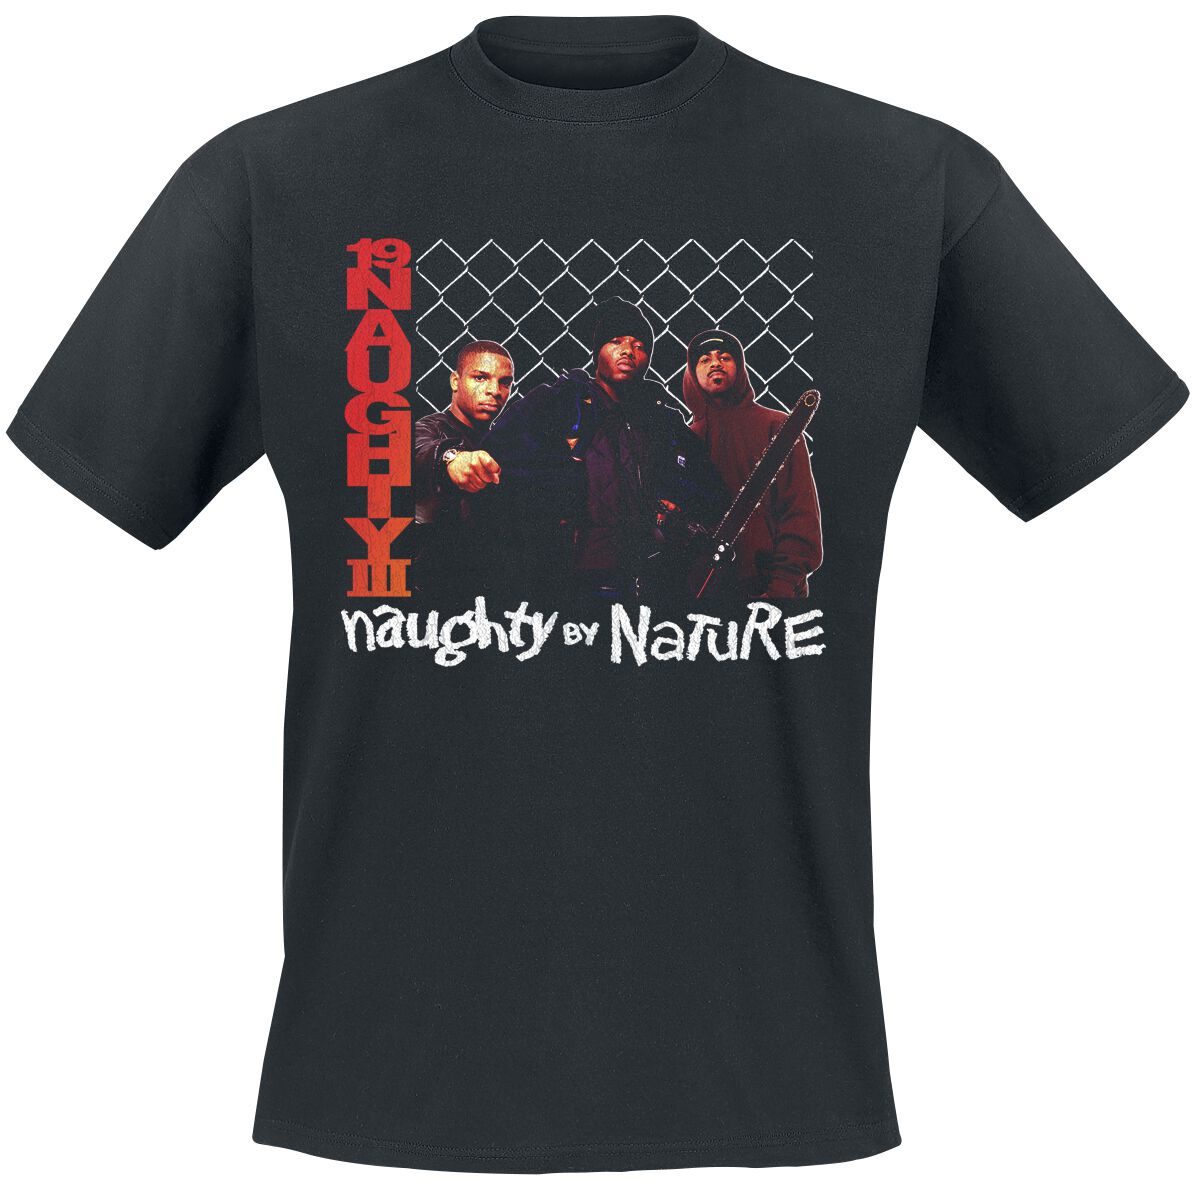 Naughty by Nature 19 Naughty 111 T-Shirt schwarz in XL